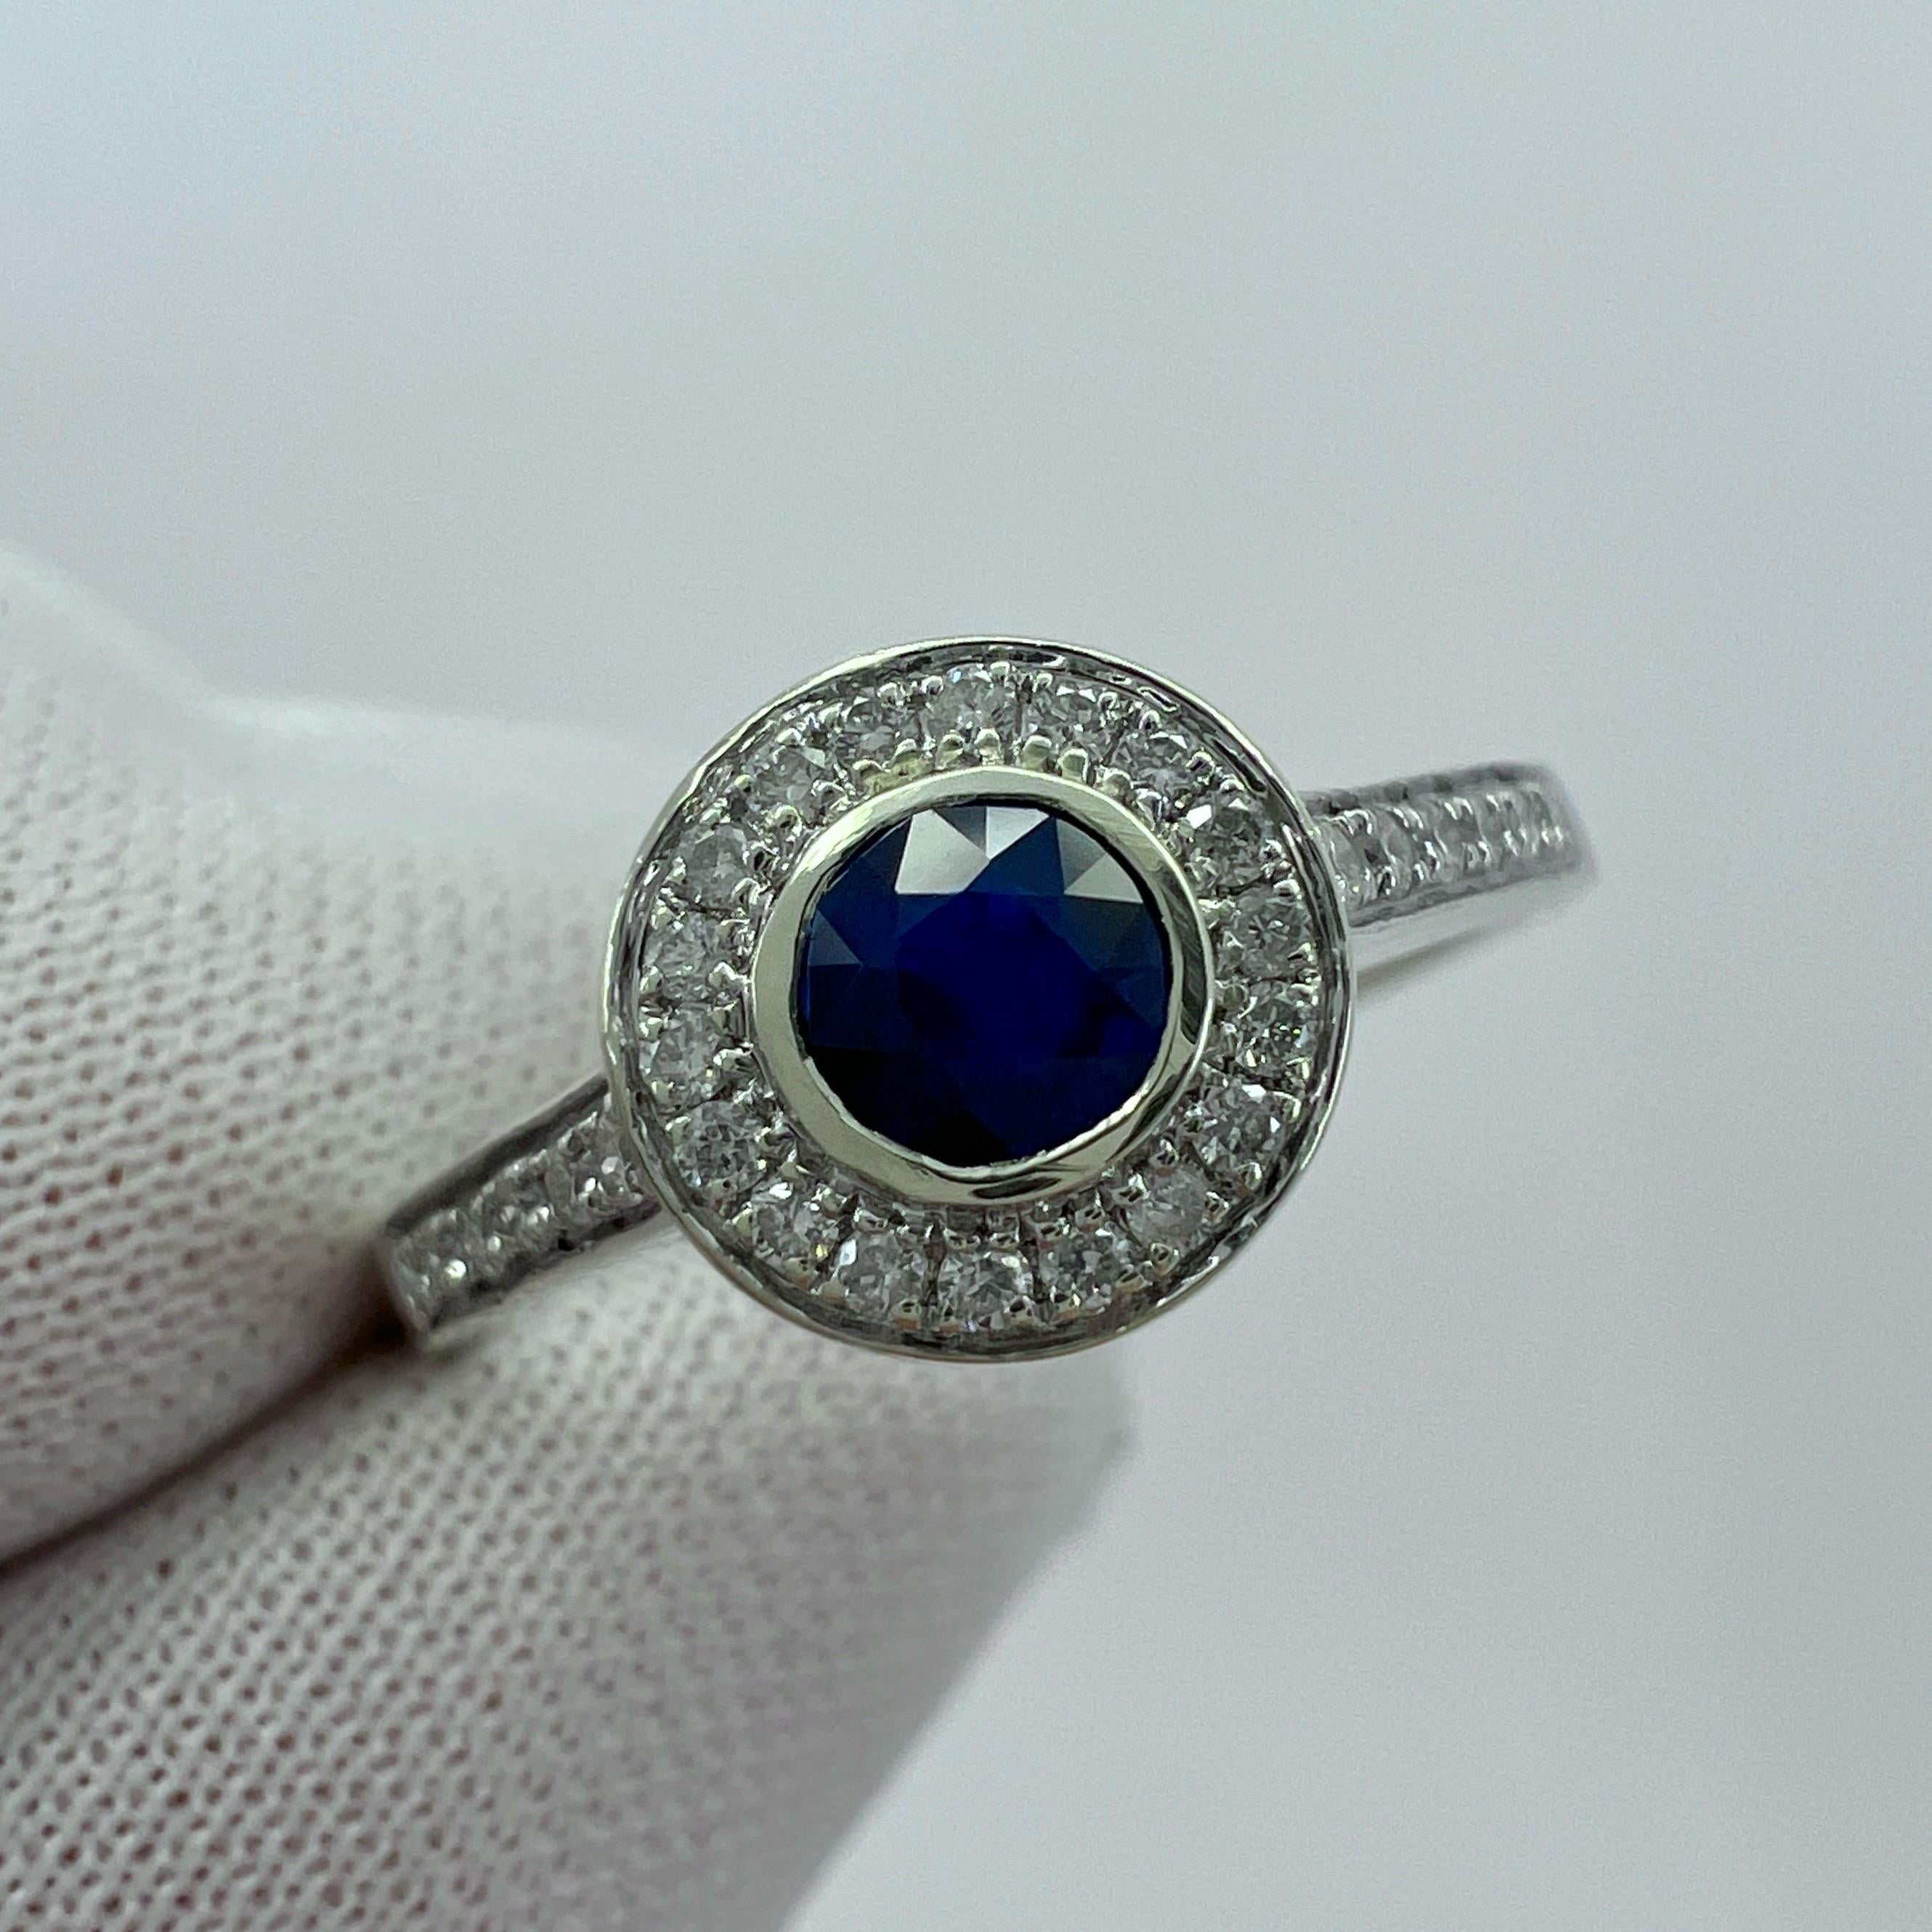 Natural Deep Blue Round Cut Sapphire And Diamond White Gold Halo Ring.

0.54 Carat total. This ring features a beautiful natural blue sapphire centre stone with a deep blue colour and very good cut and clarity. The sapphire measures 4mm (0.40